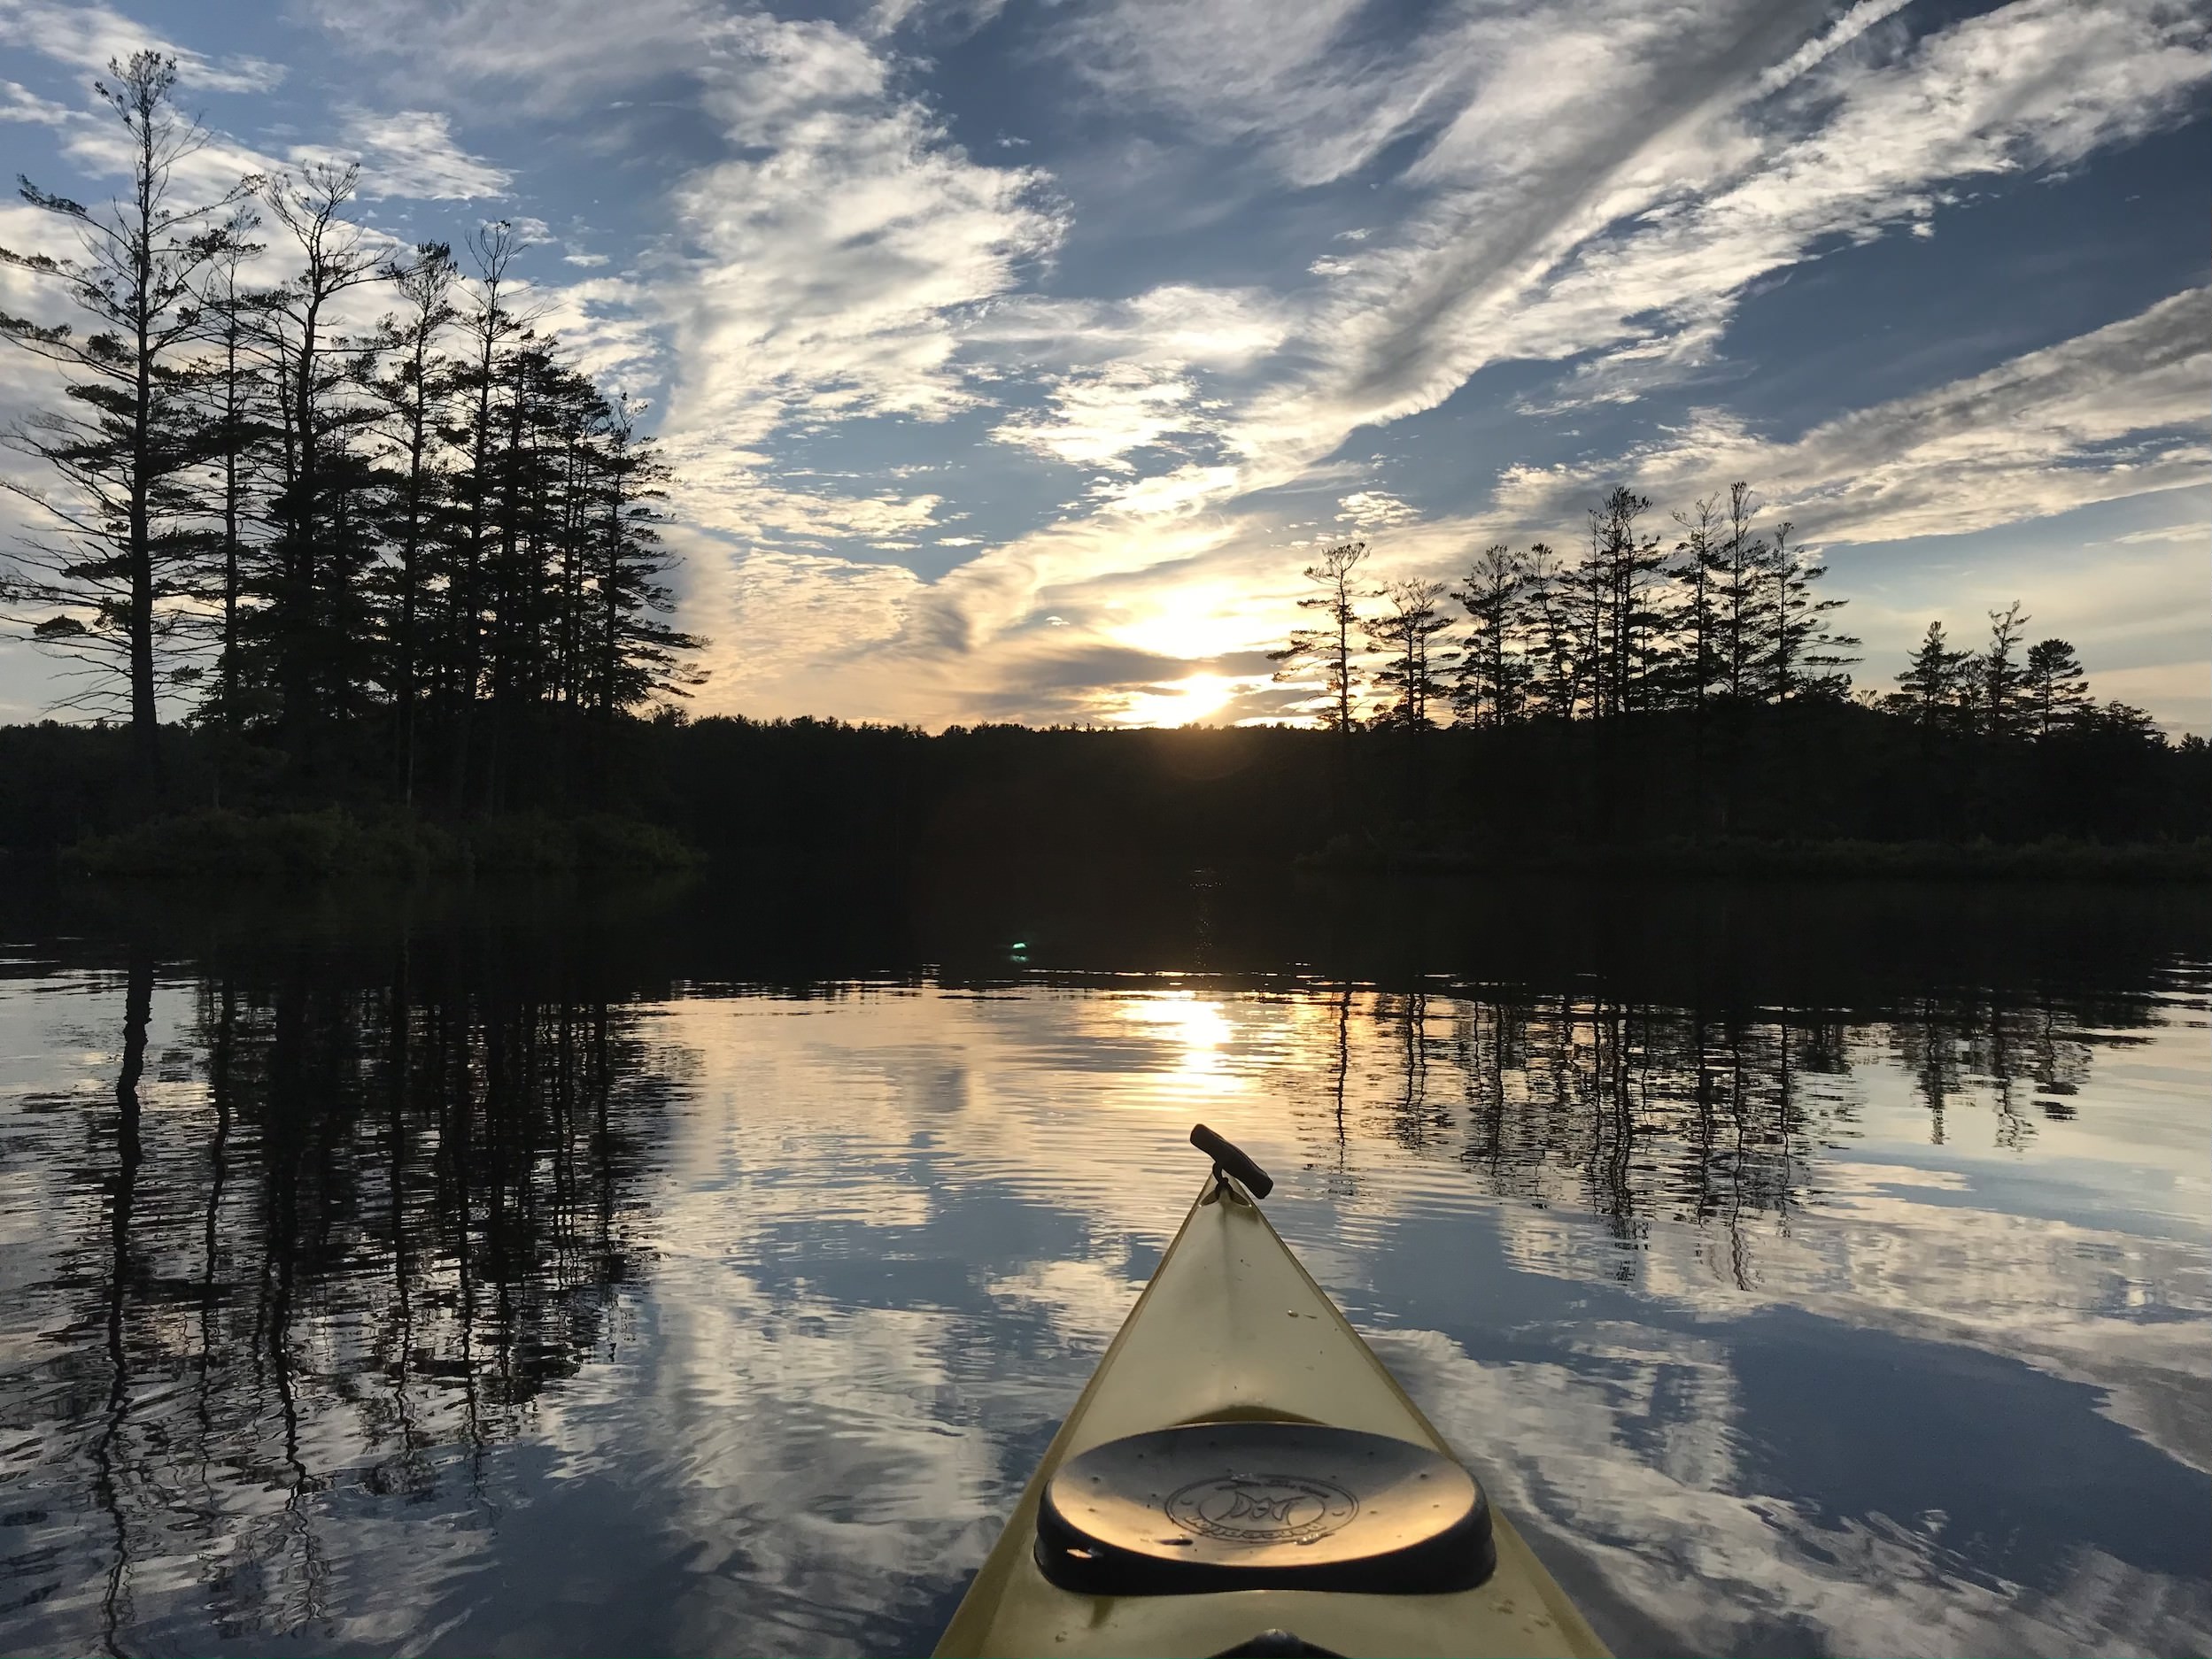 Sunset paddle, digital image taken on IPhone 7 Plus, by Quincy Biddle